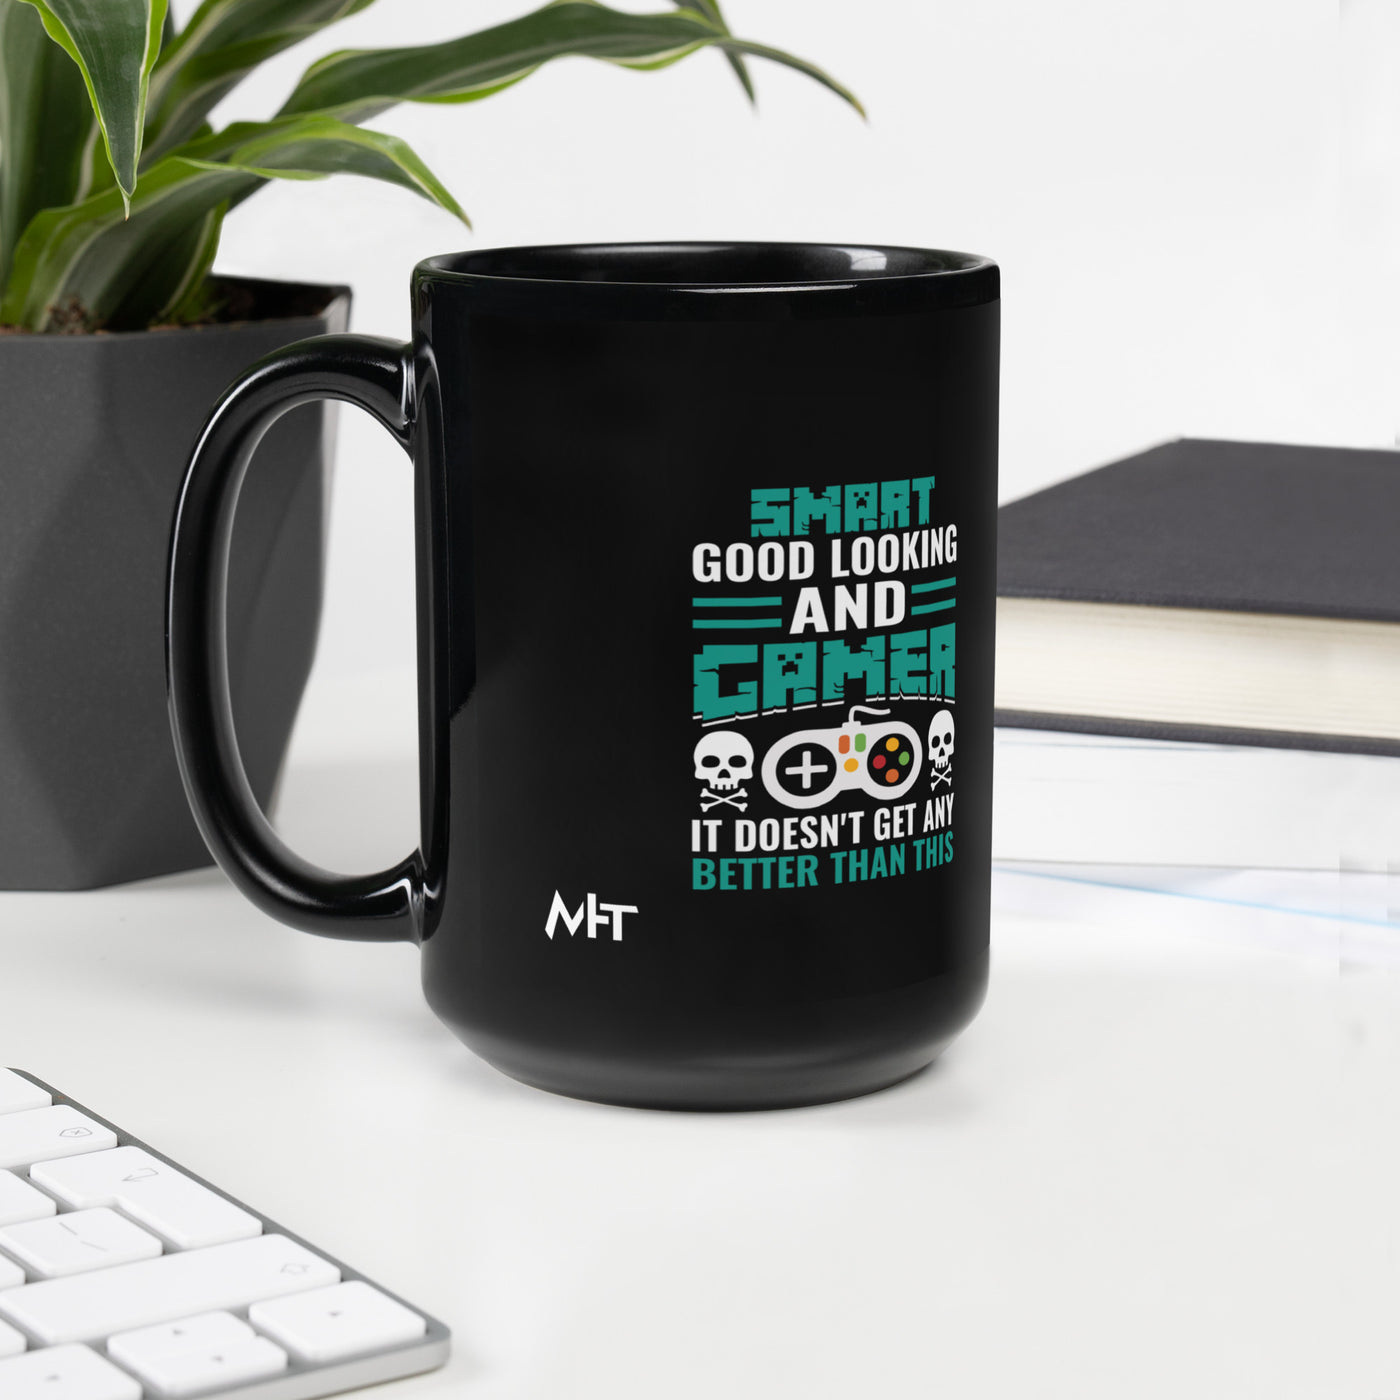 Smart Good Looking and Gamer; It Doesn't Get Any Better than this - Black Glossy Mug